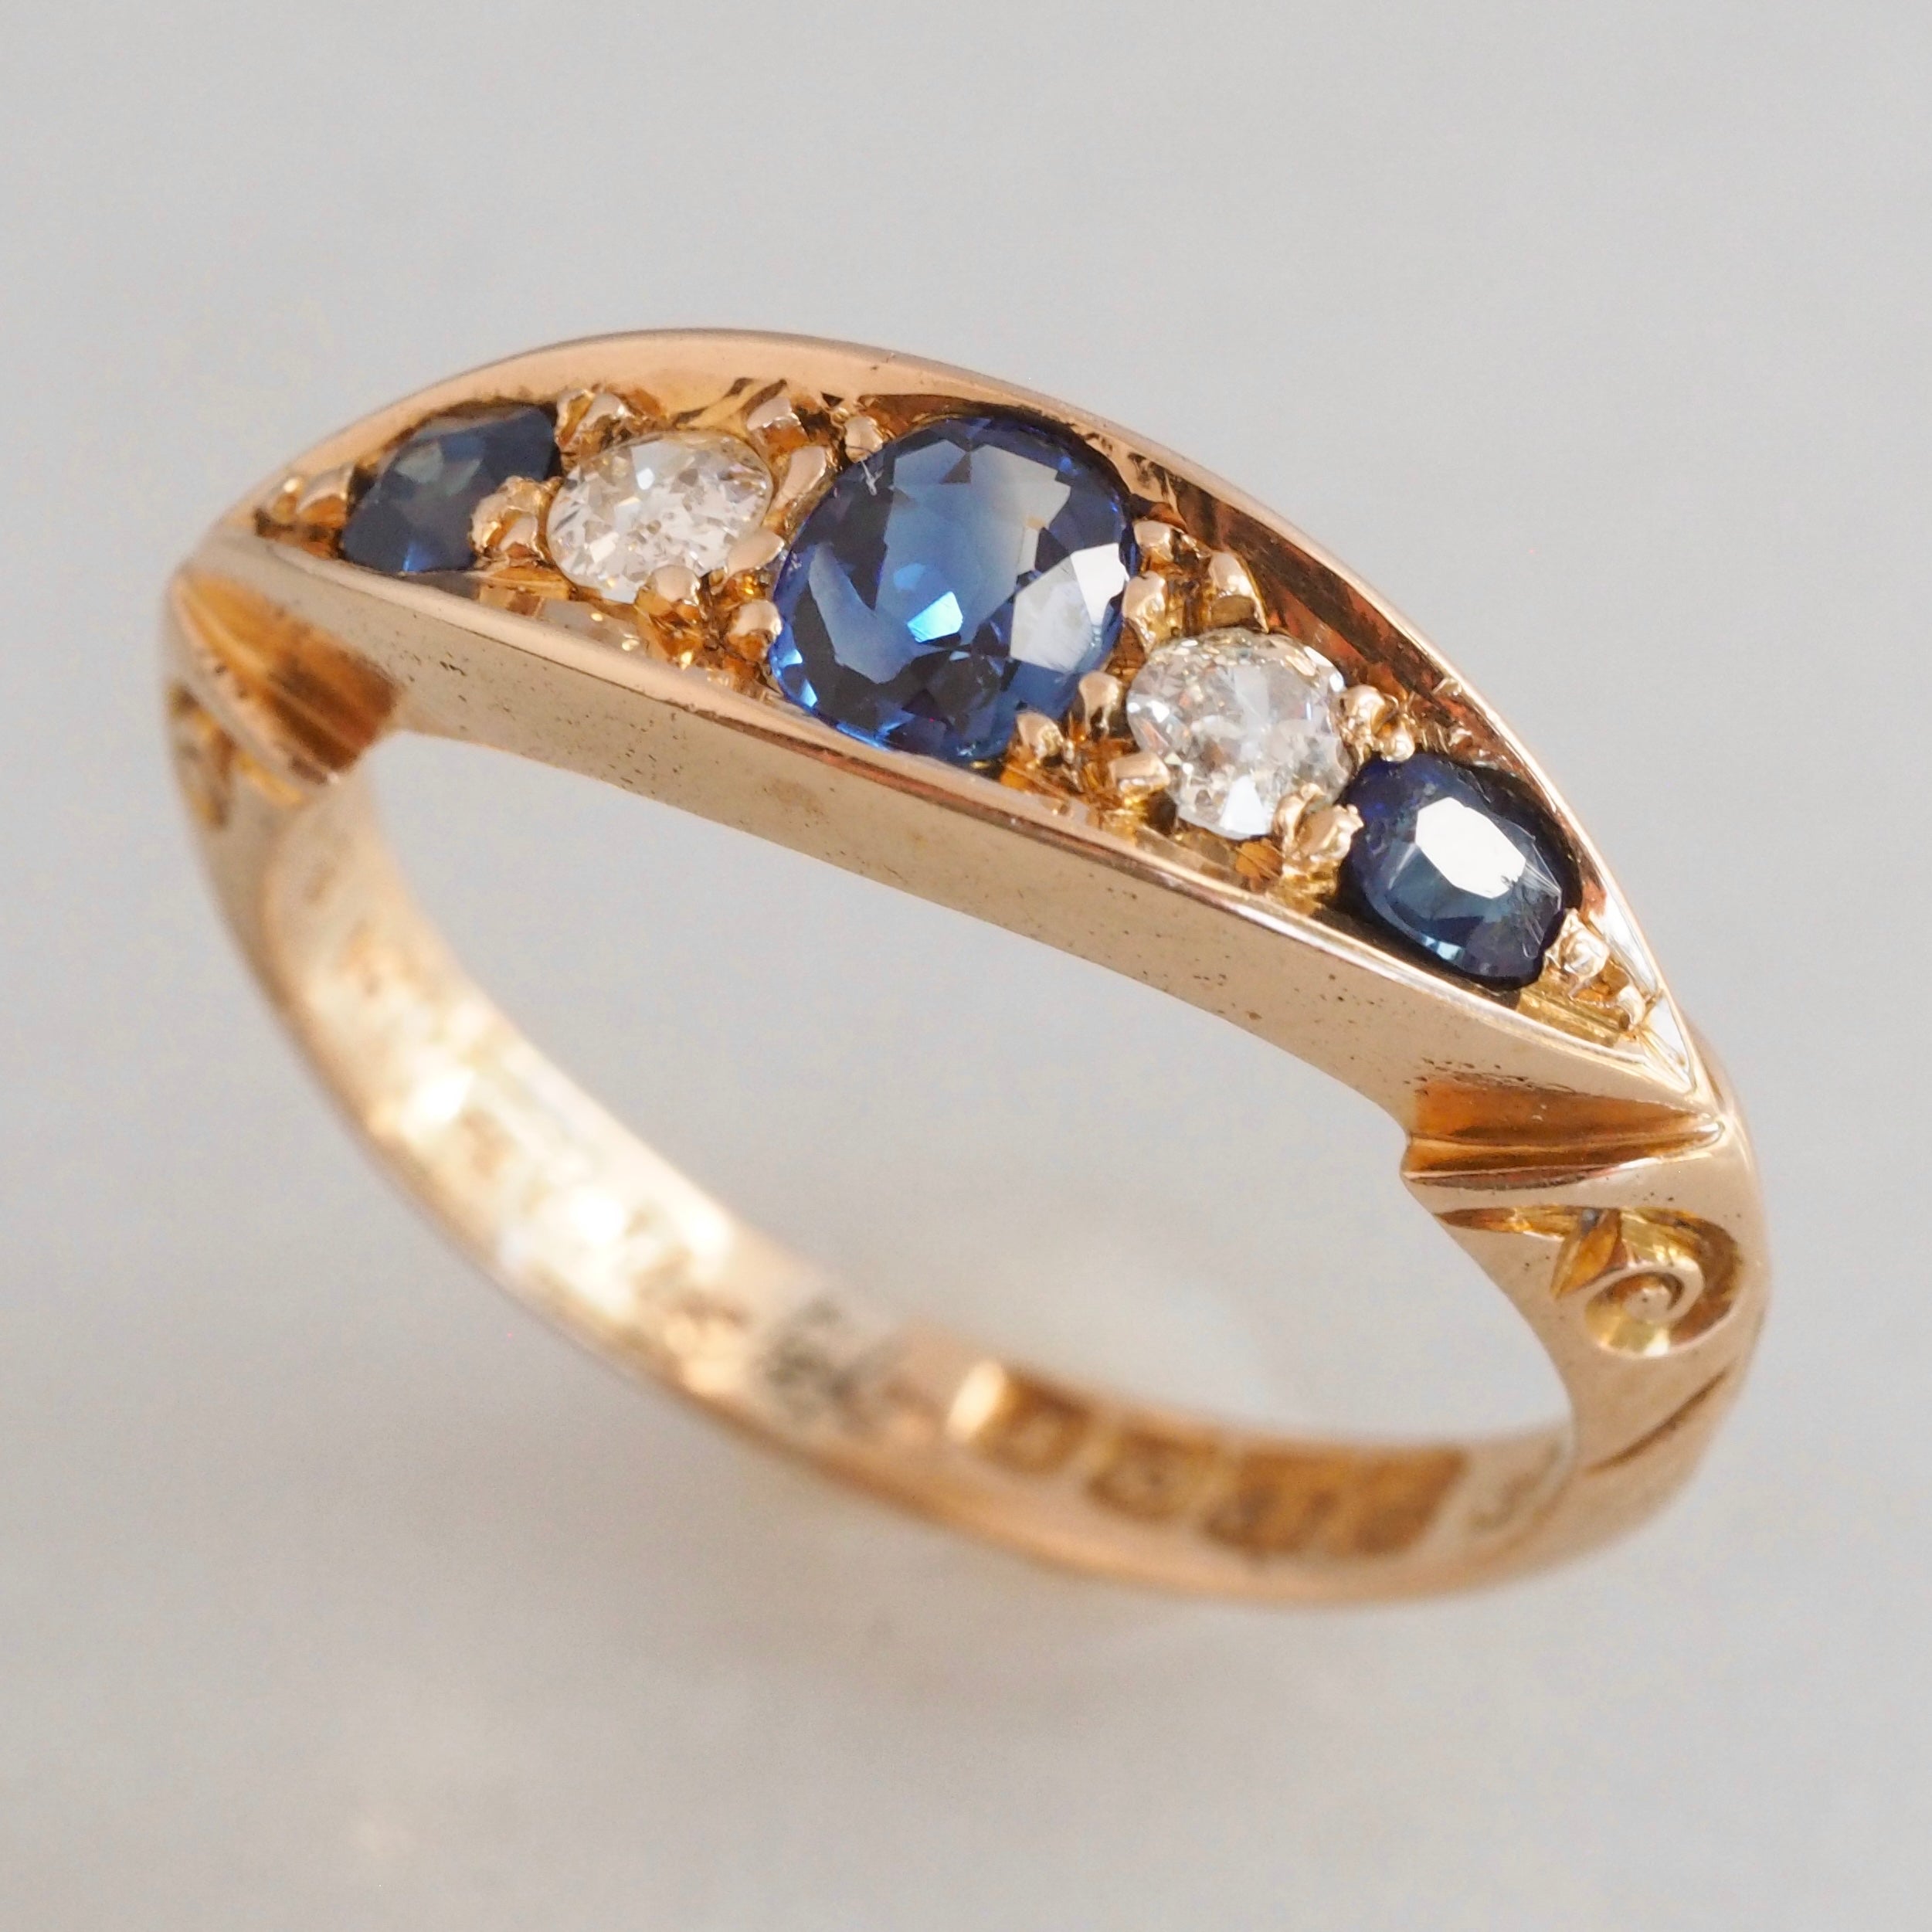 Antique Edwardian 18k Gold Sapphire and Old Mine Cut Diamond Five Stone Boat Ring